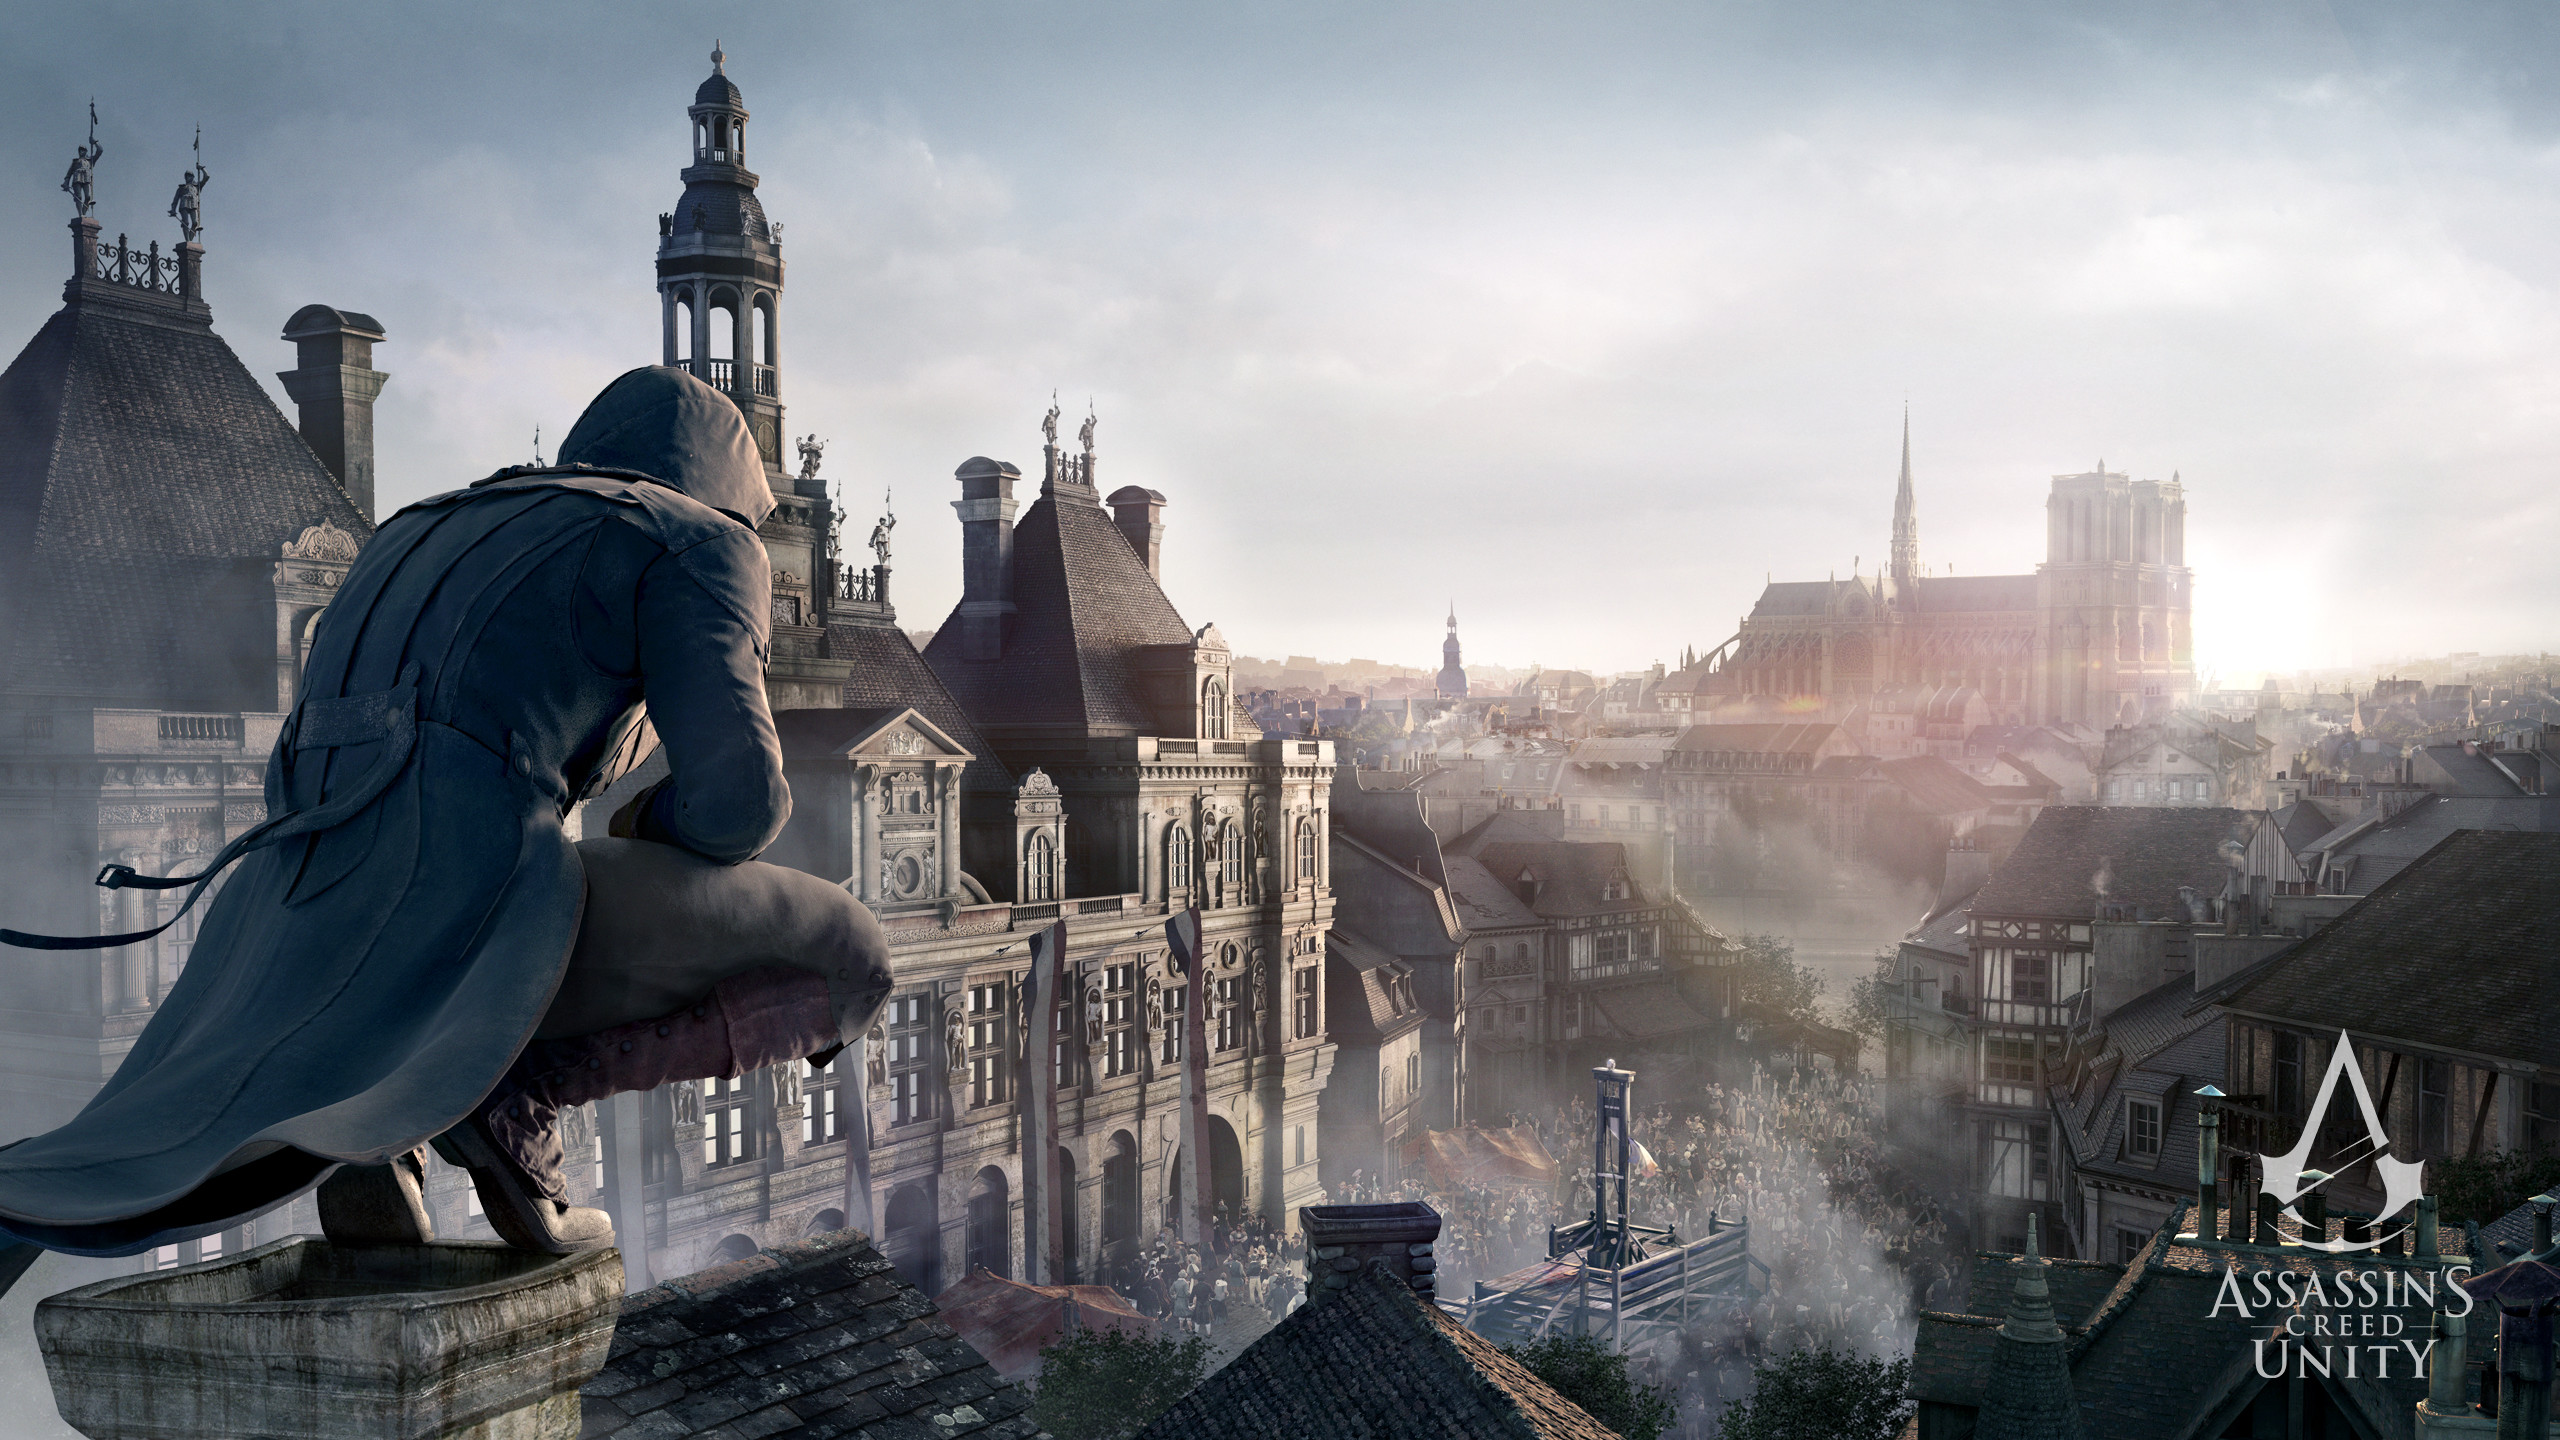 2560x1440 160 Assassin's Creed: Unity HD Wallpapers | HintergrÃ¼nde - Wallpaper Abyss